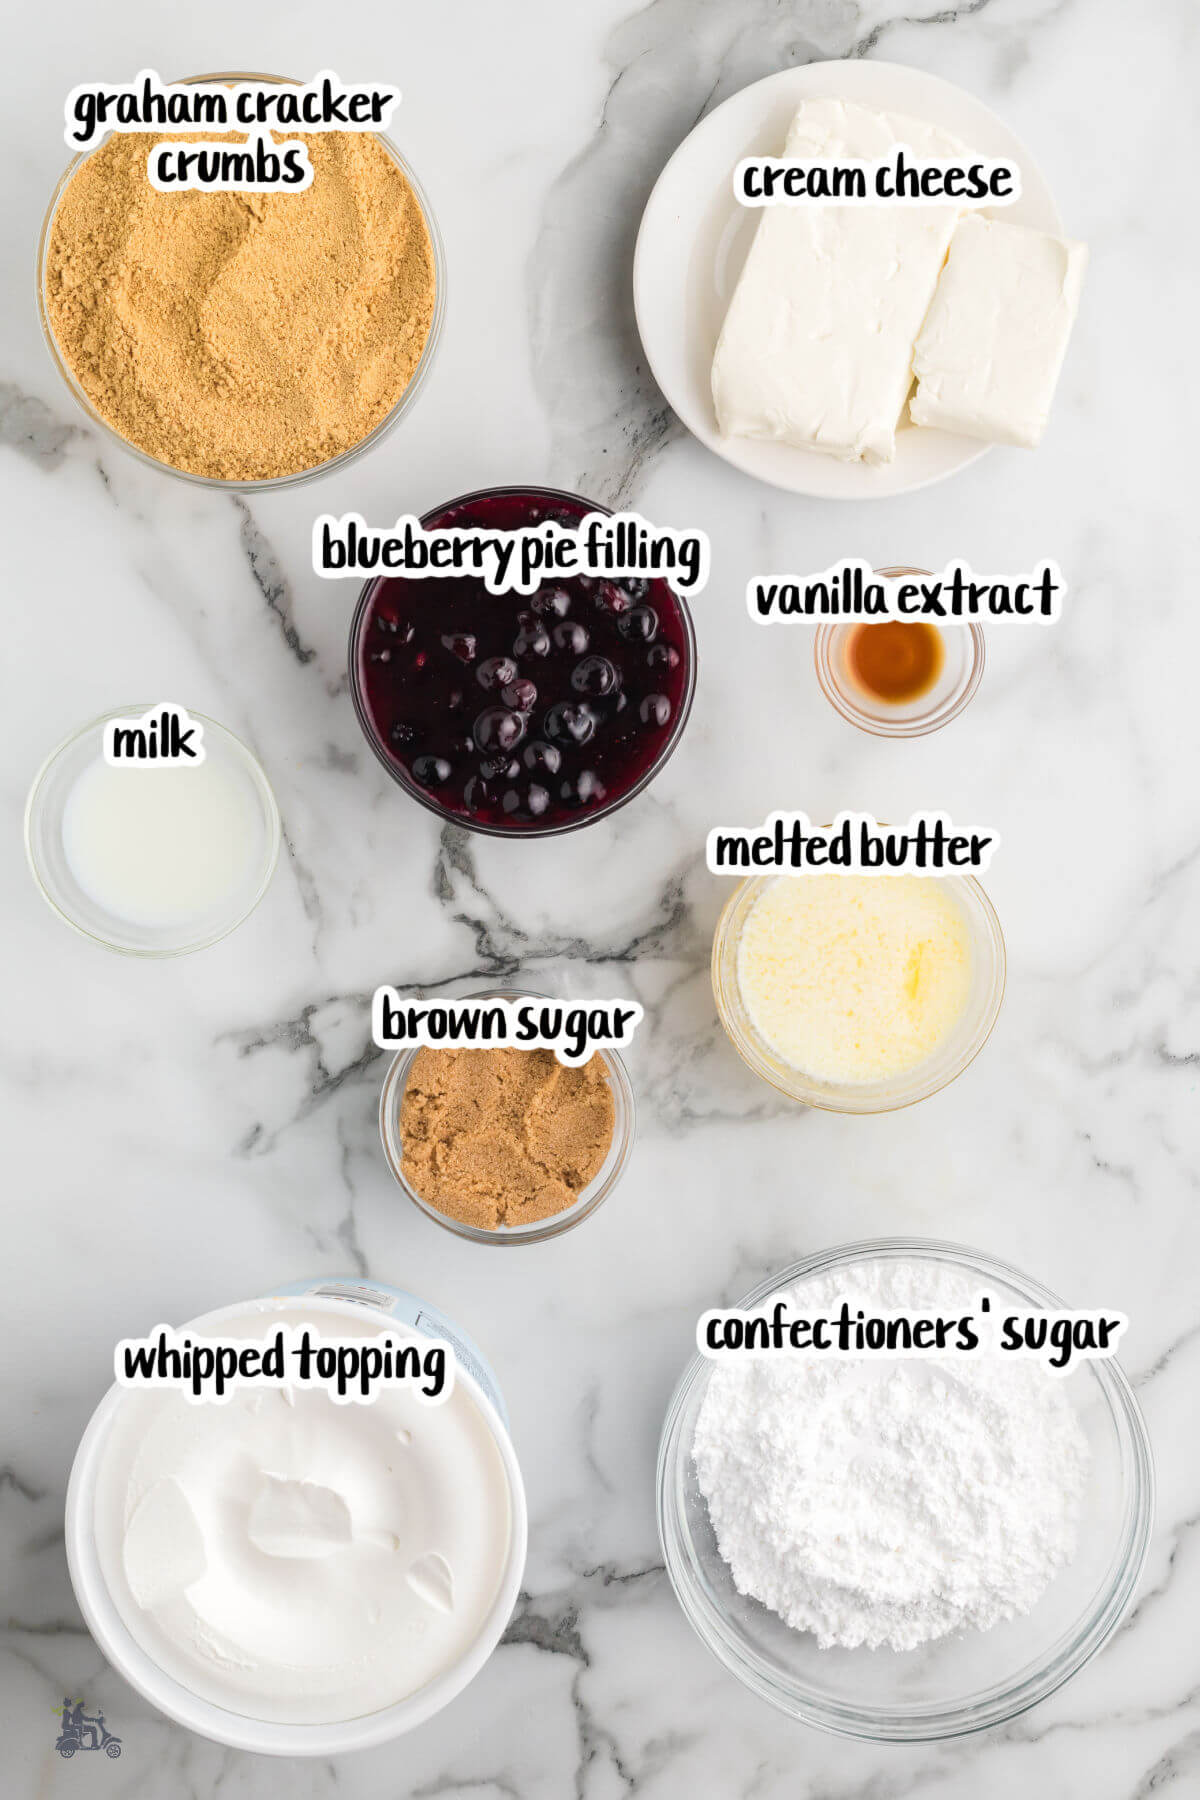 Image of the ingredients for the graham cracker crust and cheesecake filling and blueberry topping. 